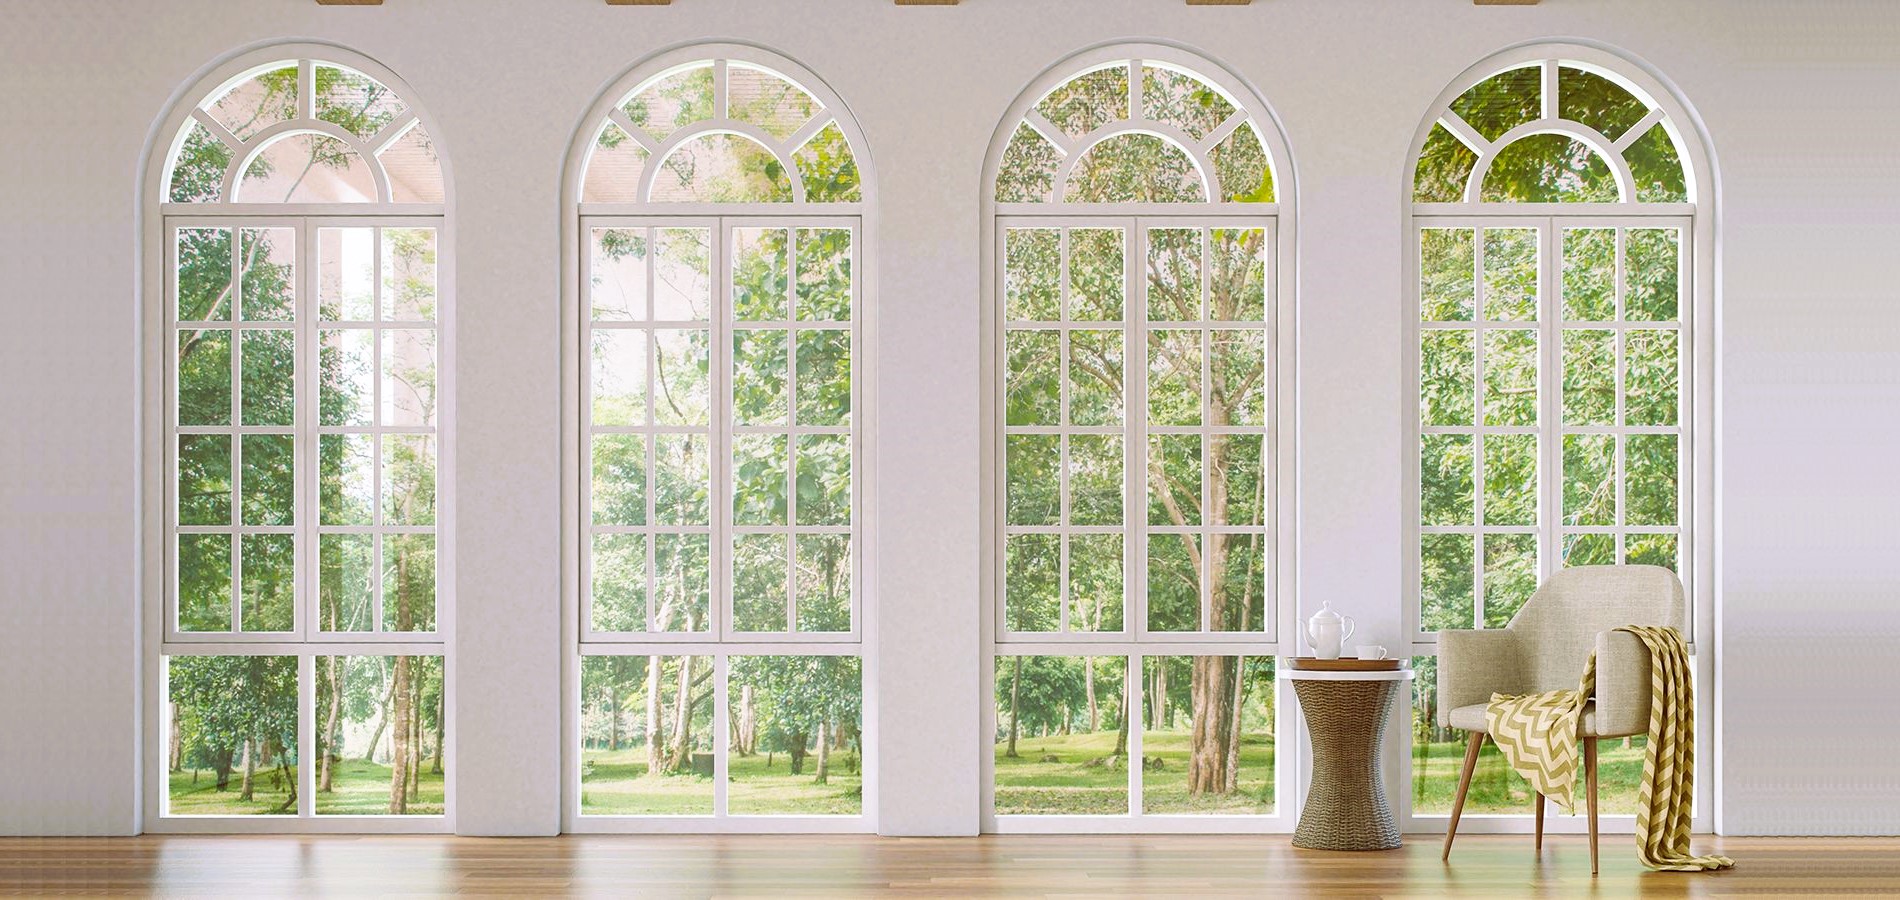 Arched Windows into Your Design